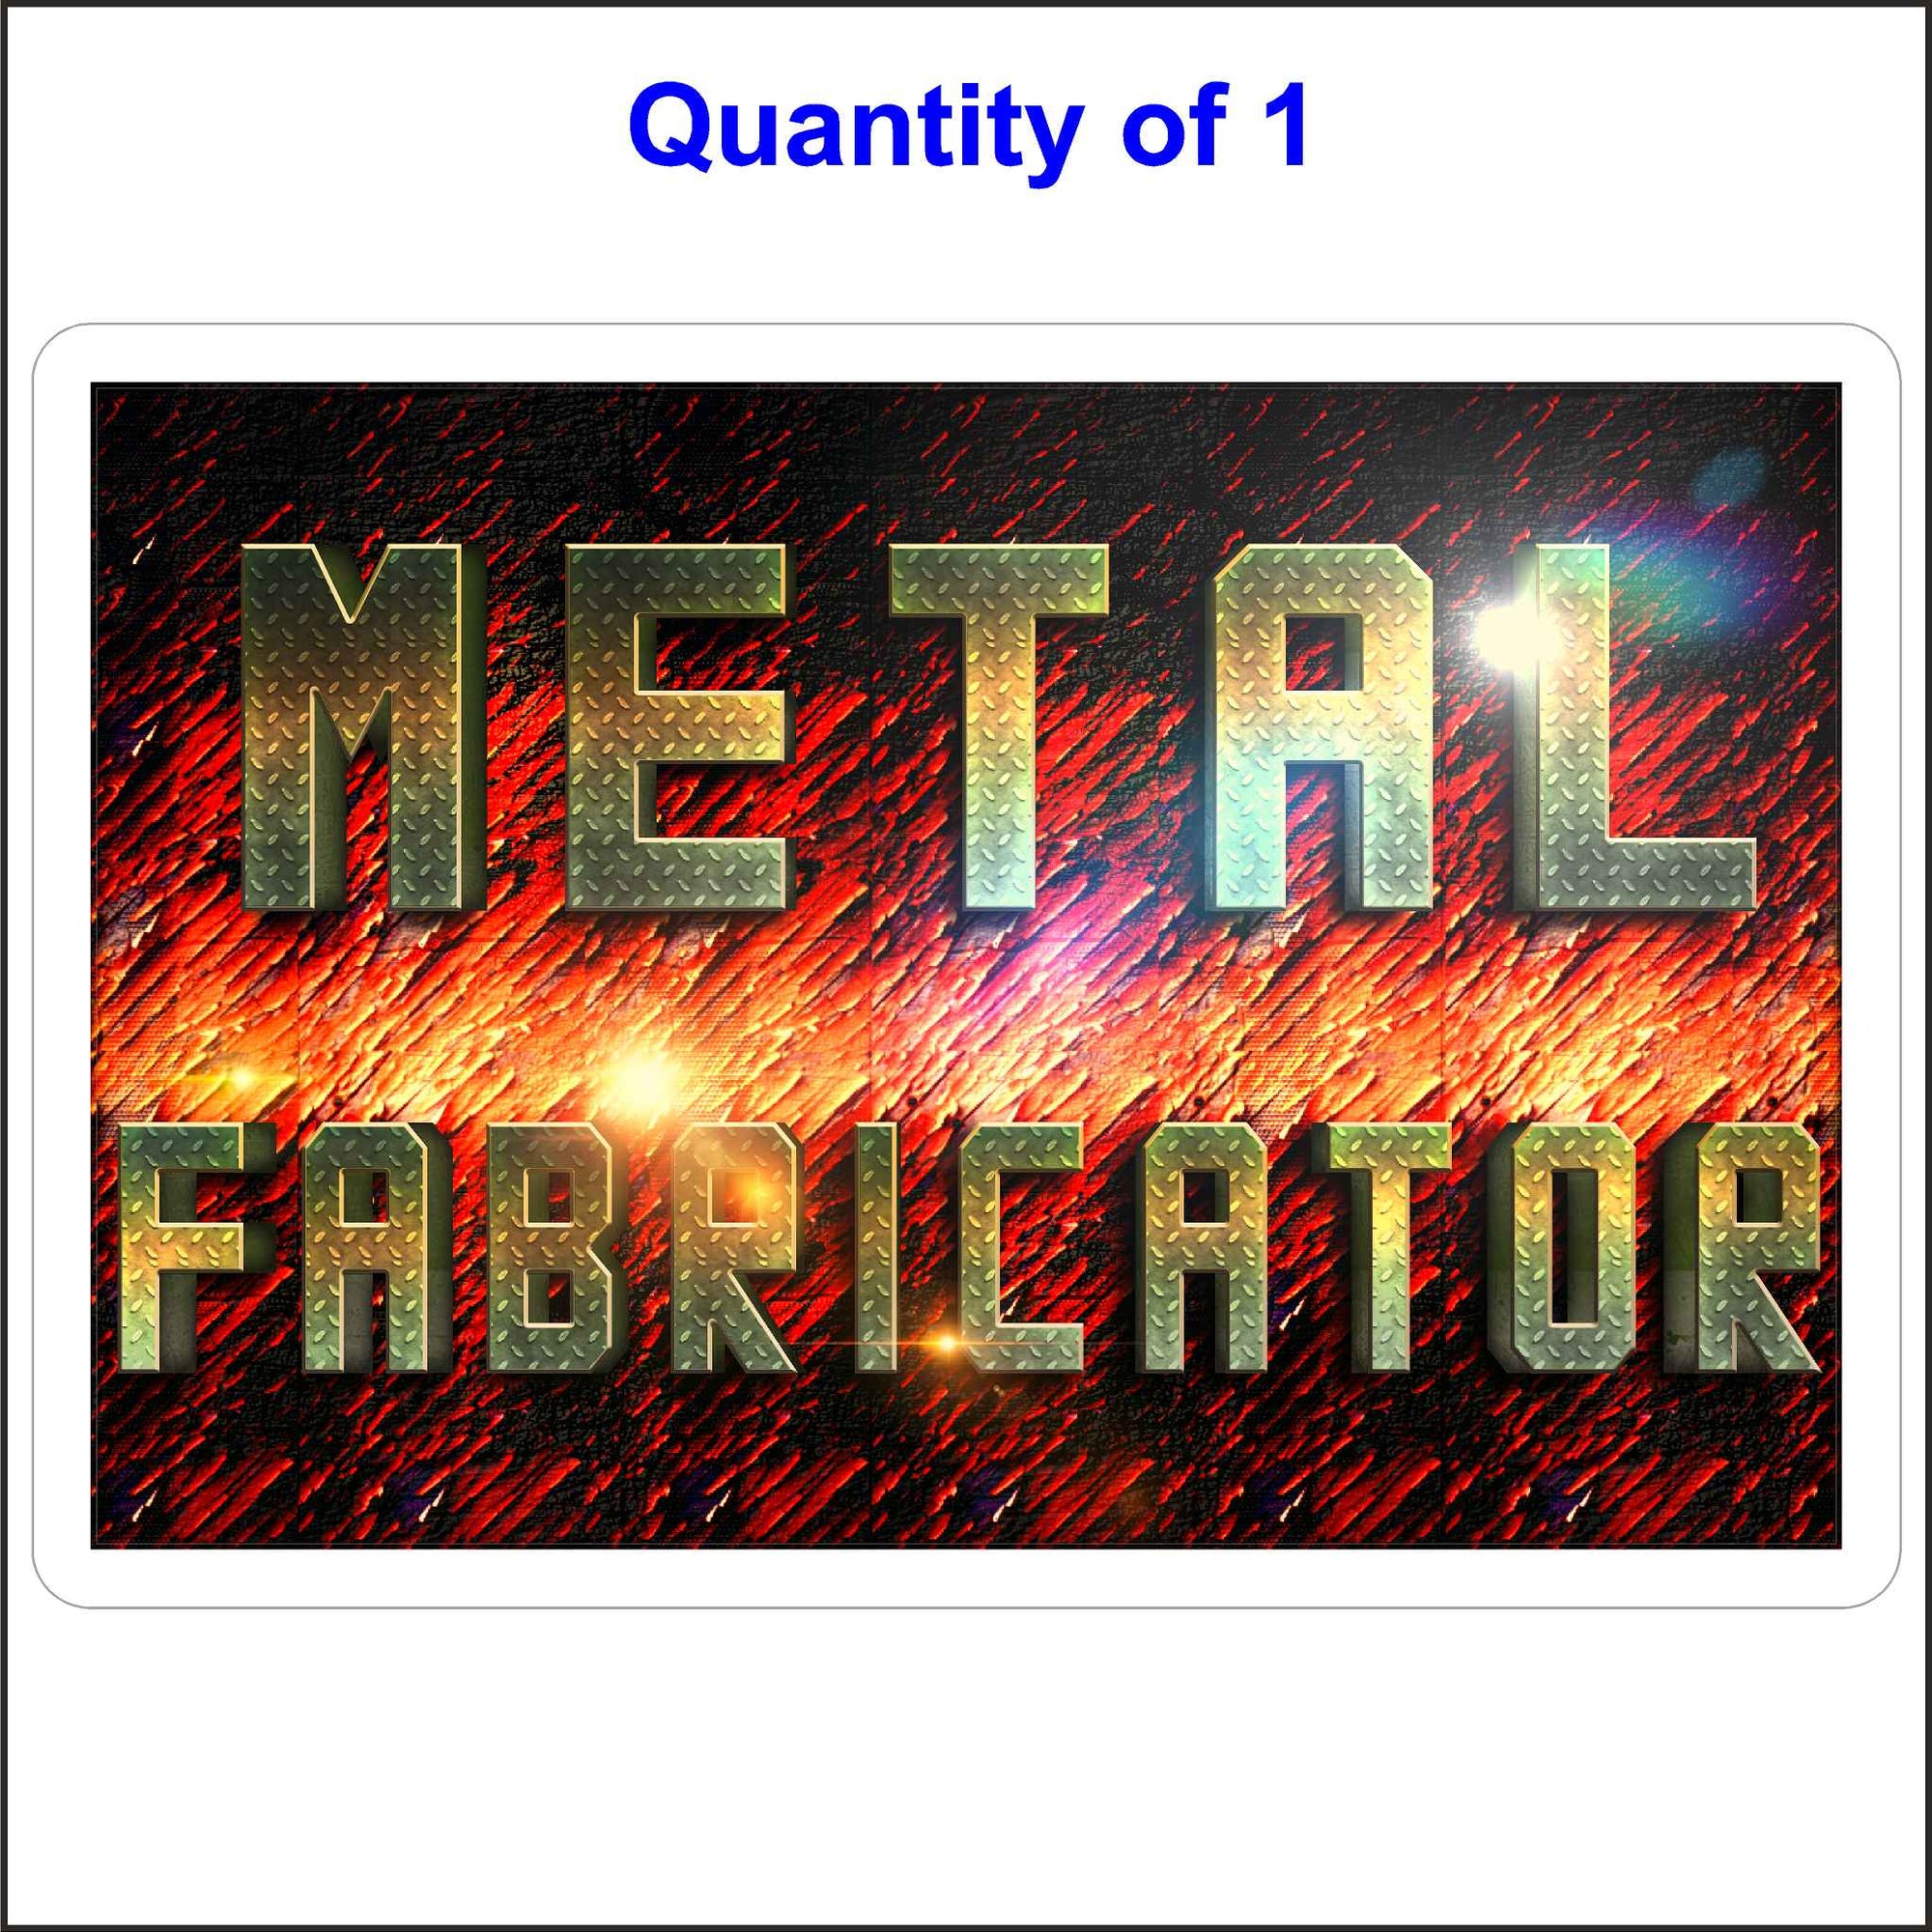 This Metal Fabricator Sticker Is Printed in Full Color and Shows the Text on a Diamond Plate and the Background in Colorful Etched Metal.